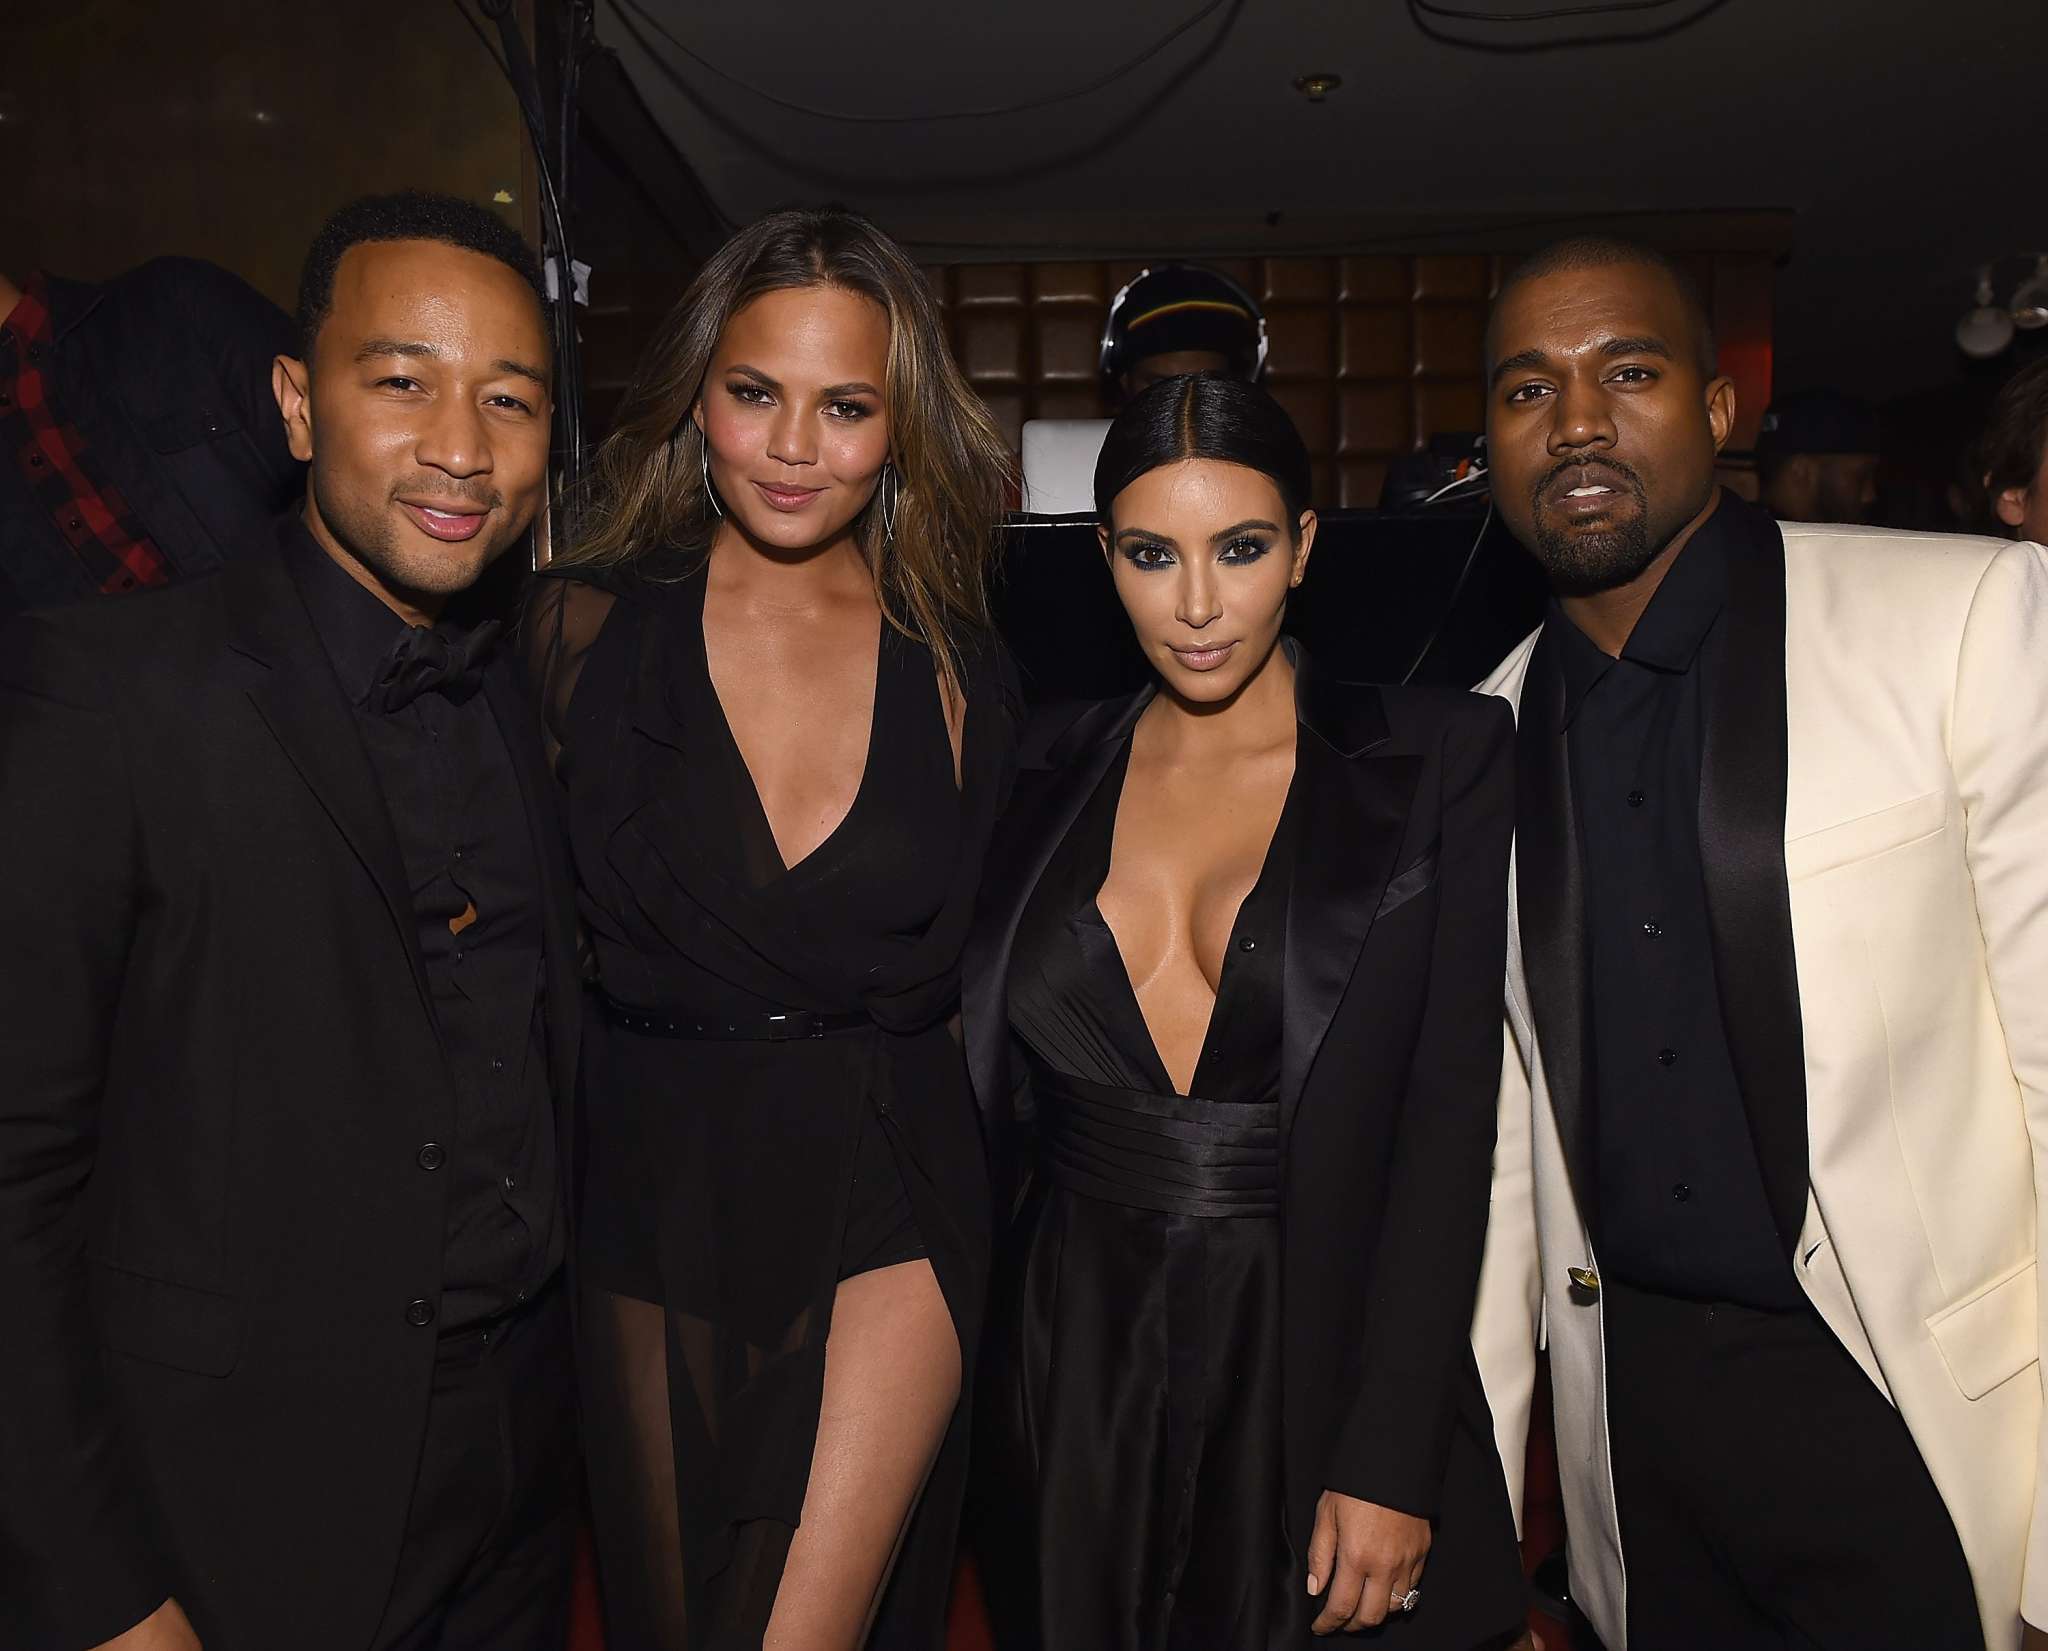 ”chrissy-teigen-says-kim-kardashian-gave-her-all-trying-to-save-kanye-west-marriage-and-updates-fans-on-how-shes-doing”